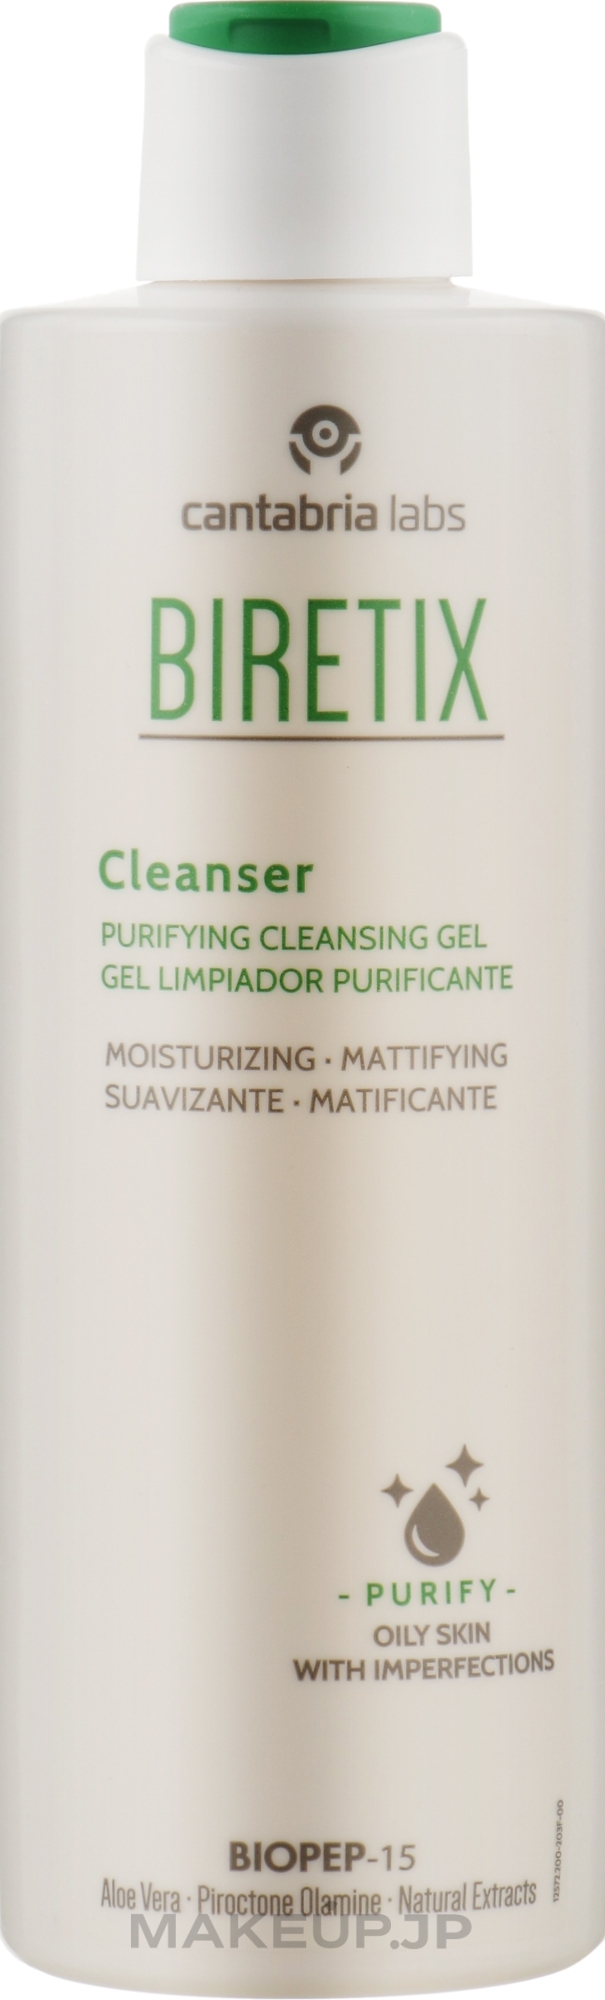 Face Cleansing Gel - Cantabria Labs Biretix Cleanser Purifying Cleansing Gel — photo 200 ml